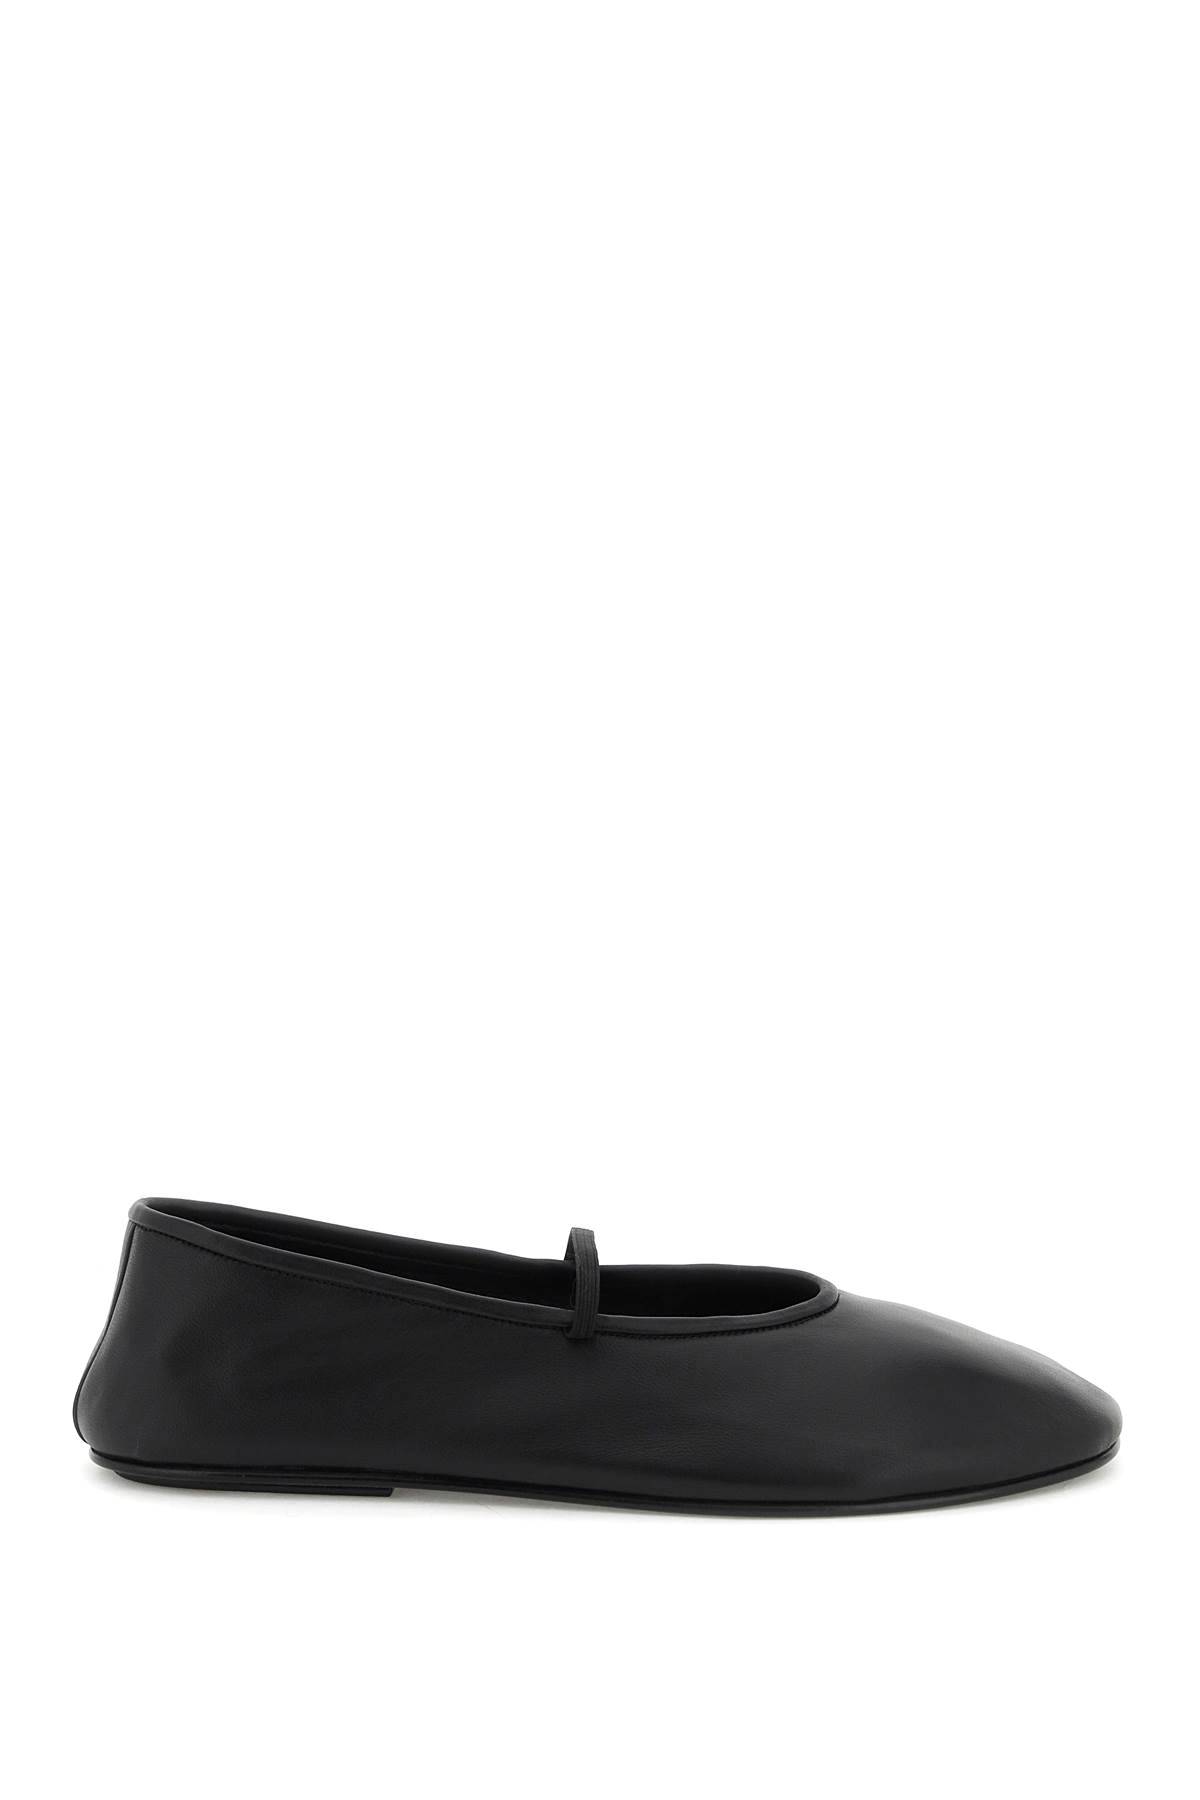 The Row THE ROW nappa leather ballet slippers